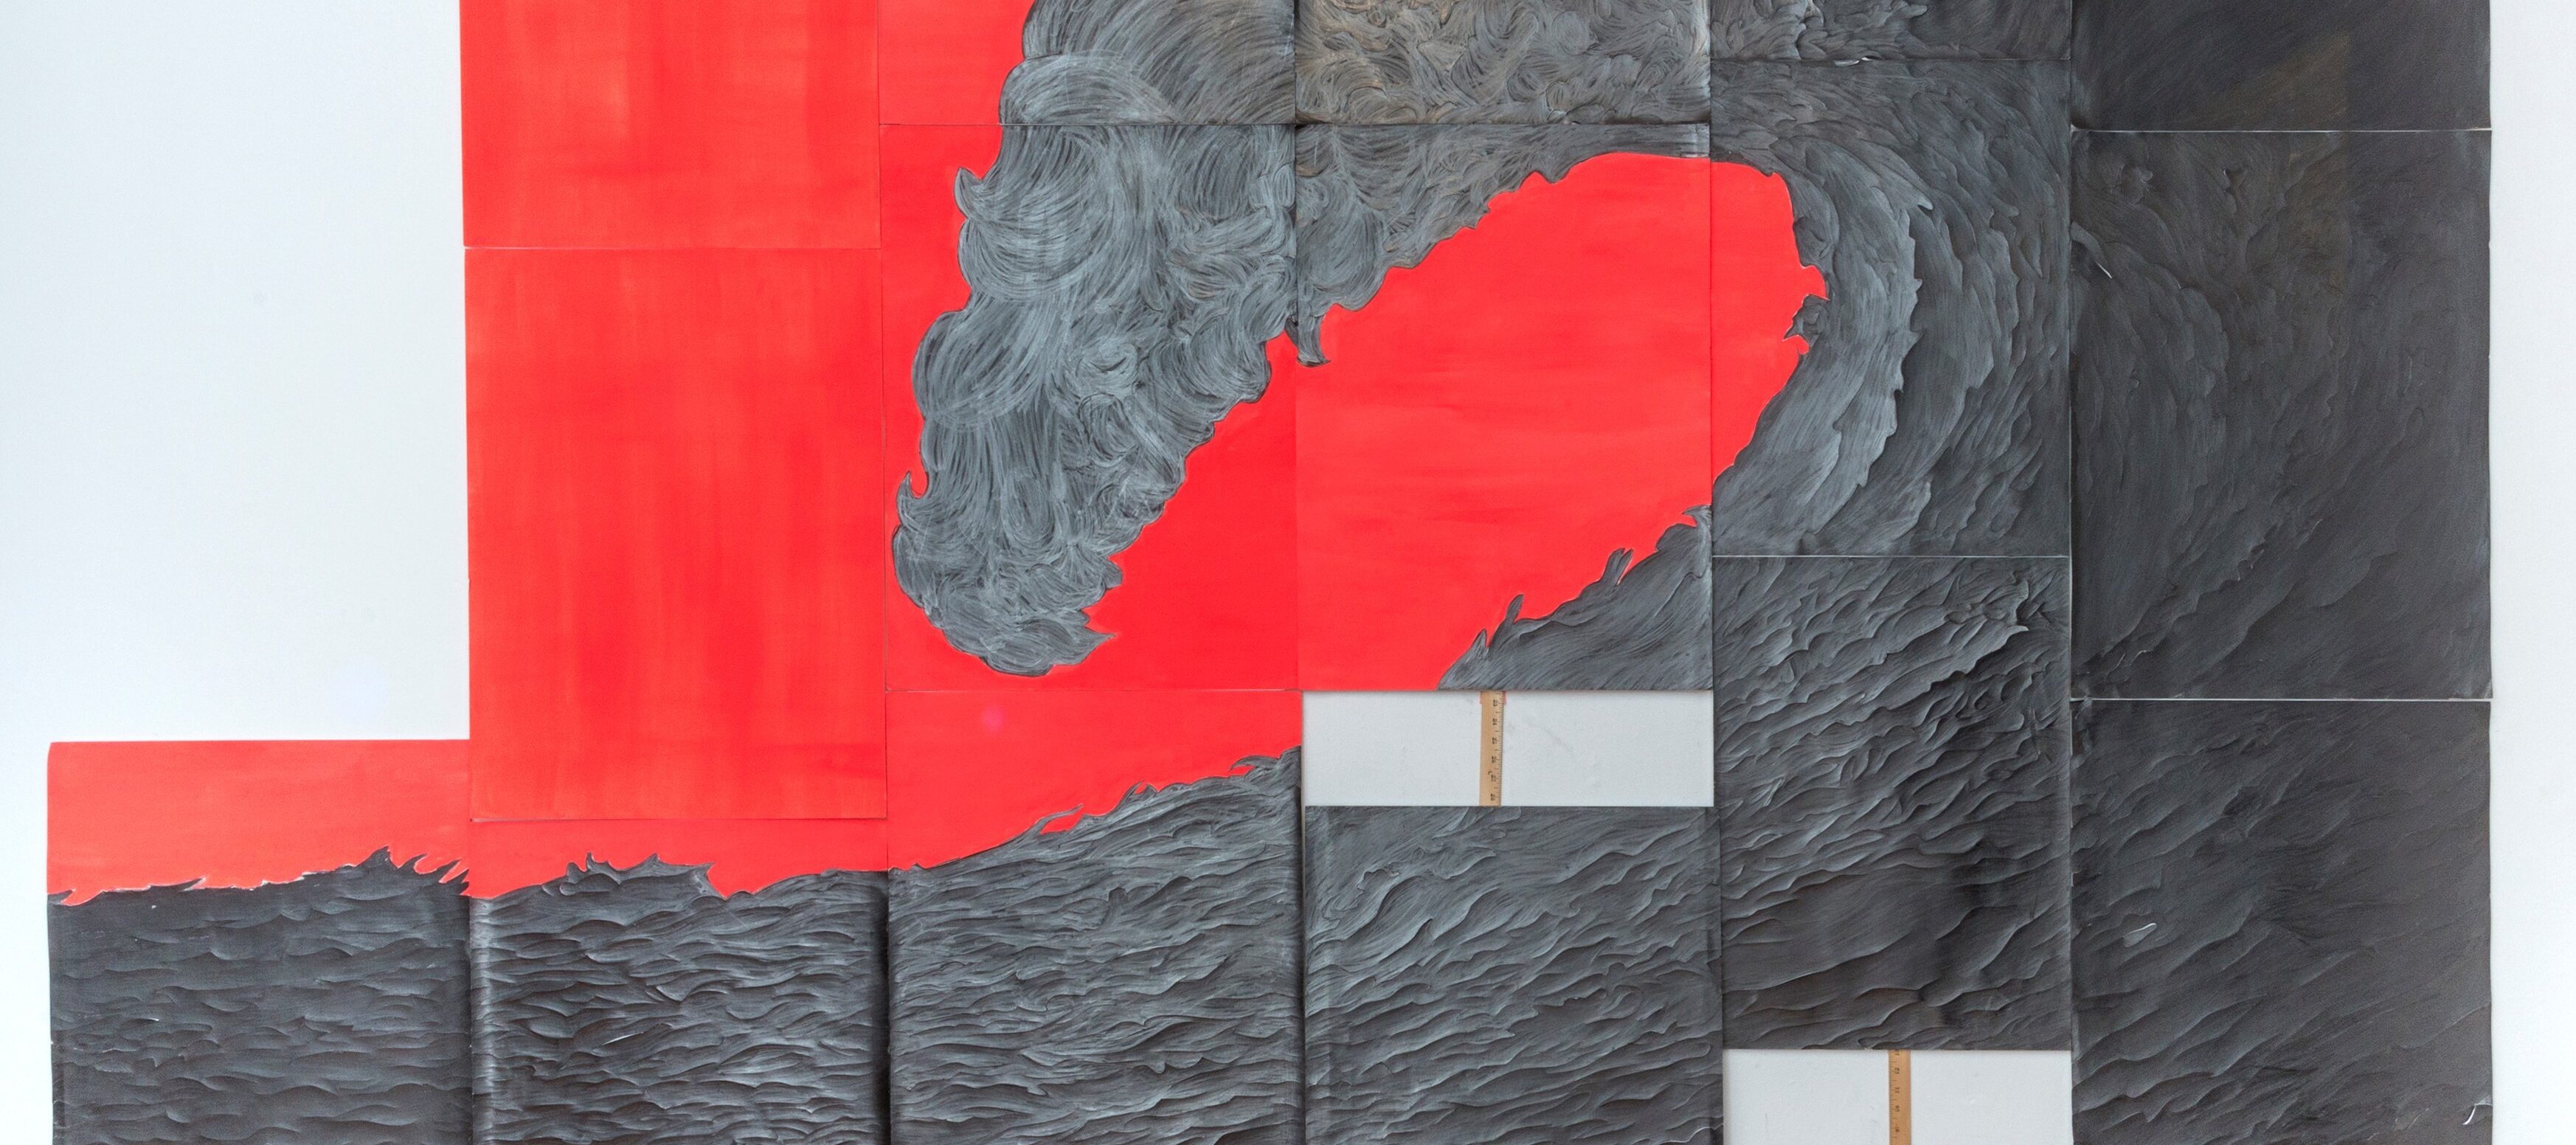 Six rectangular panels of varying heights with a coral background are hung together on a wall with yardsticks attached to the bottoms of each panel. Each panel includes a part of a textured graphite drawing that looks like a giant crashing wave when seen as a whole.